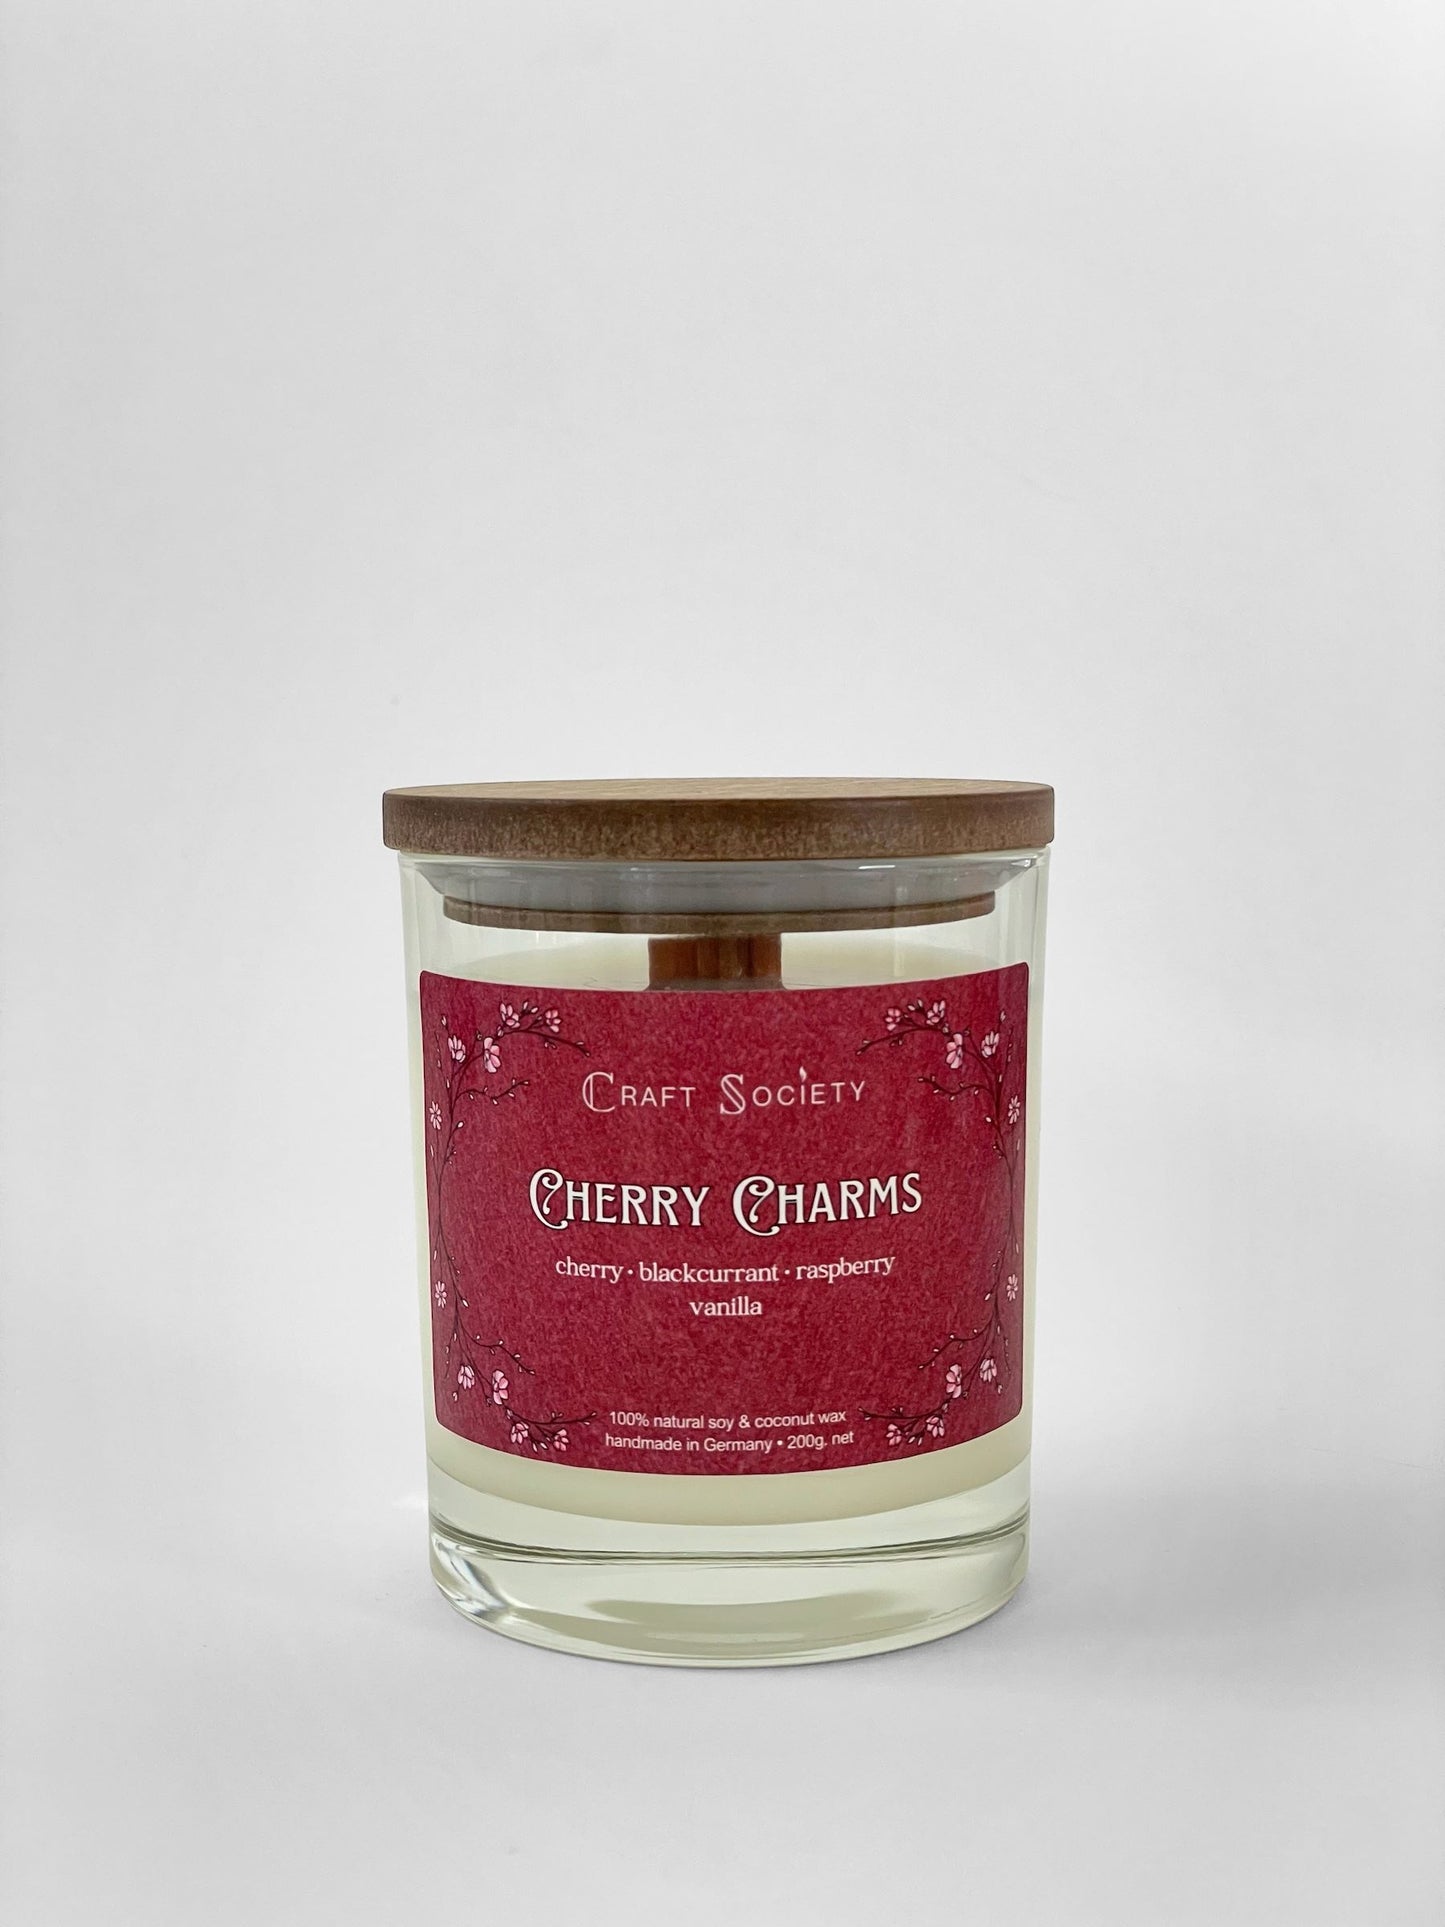 A scented candle called Cherry Charms on a white background, box, clear glass jar, deluxe version with wooden wick